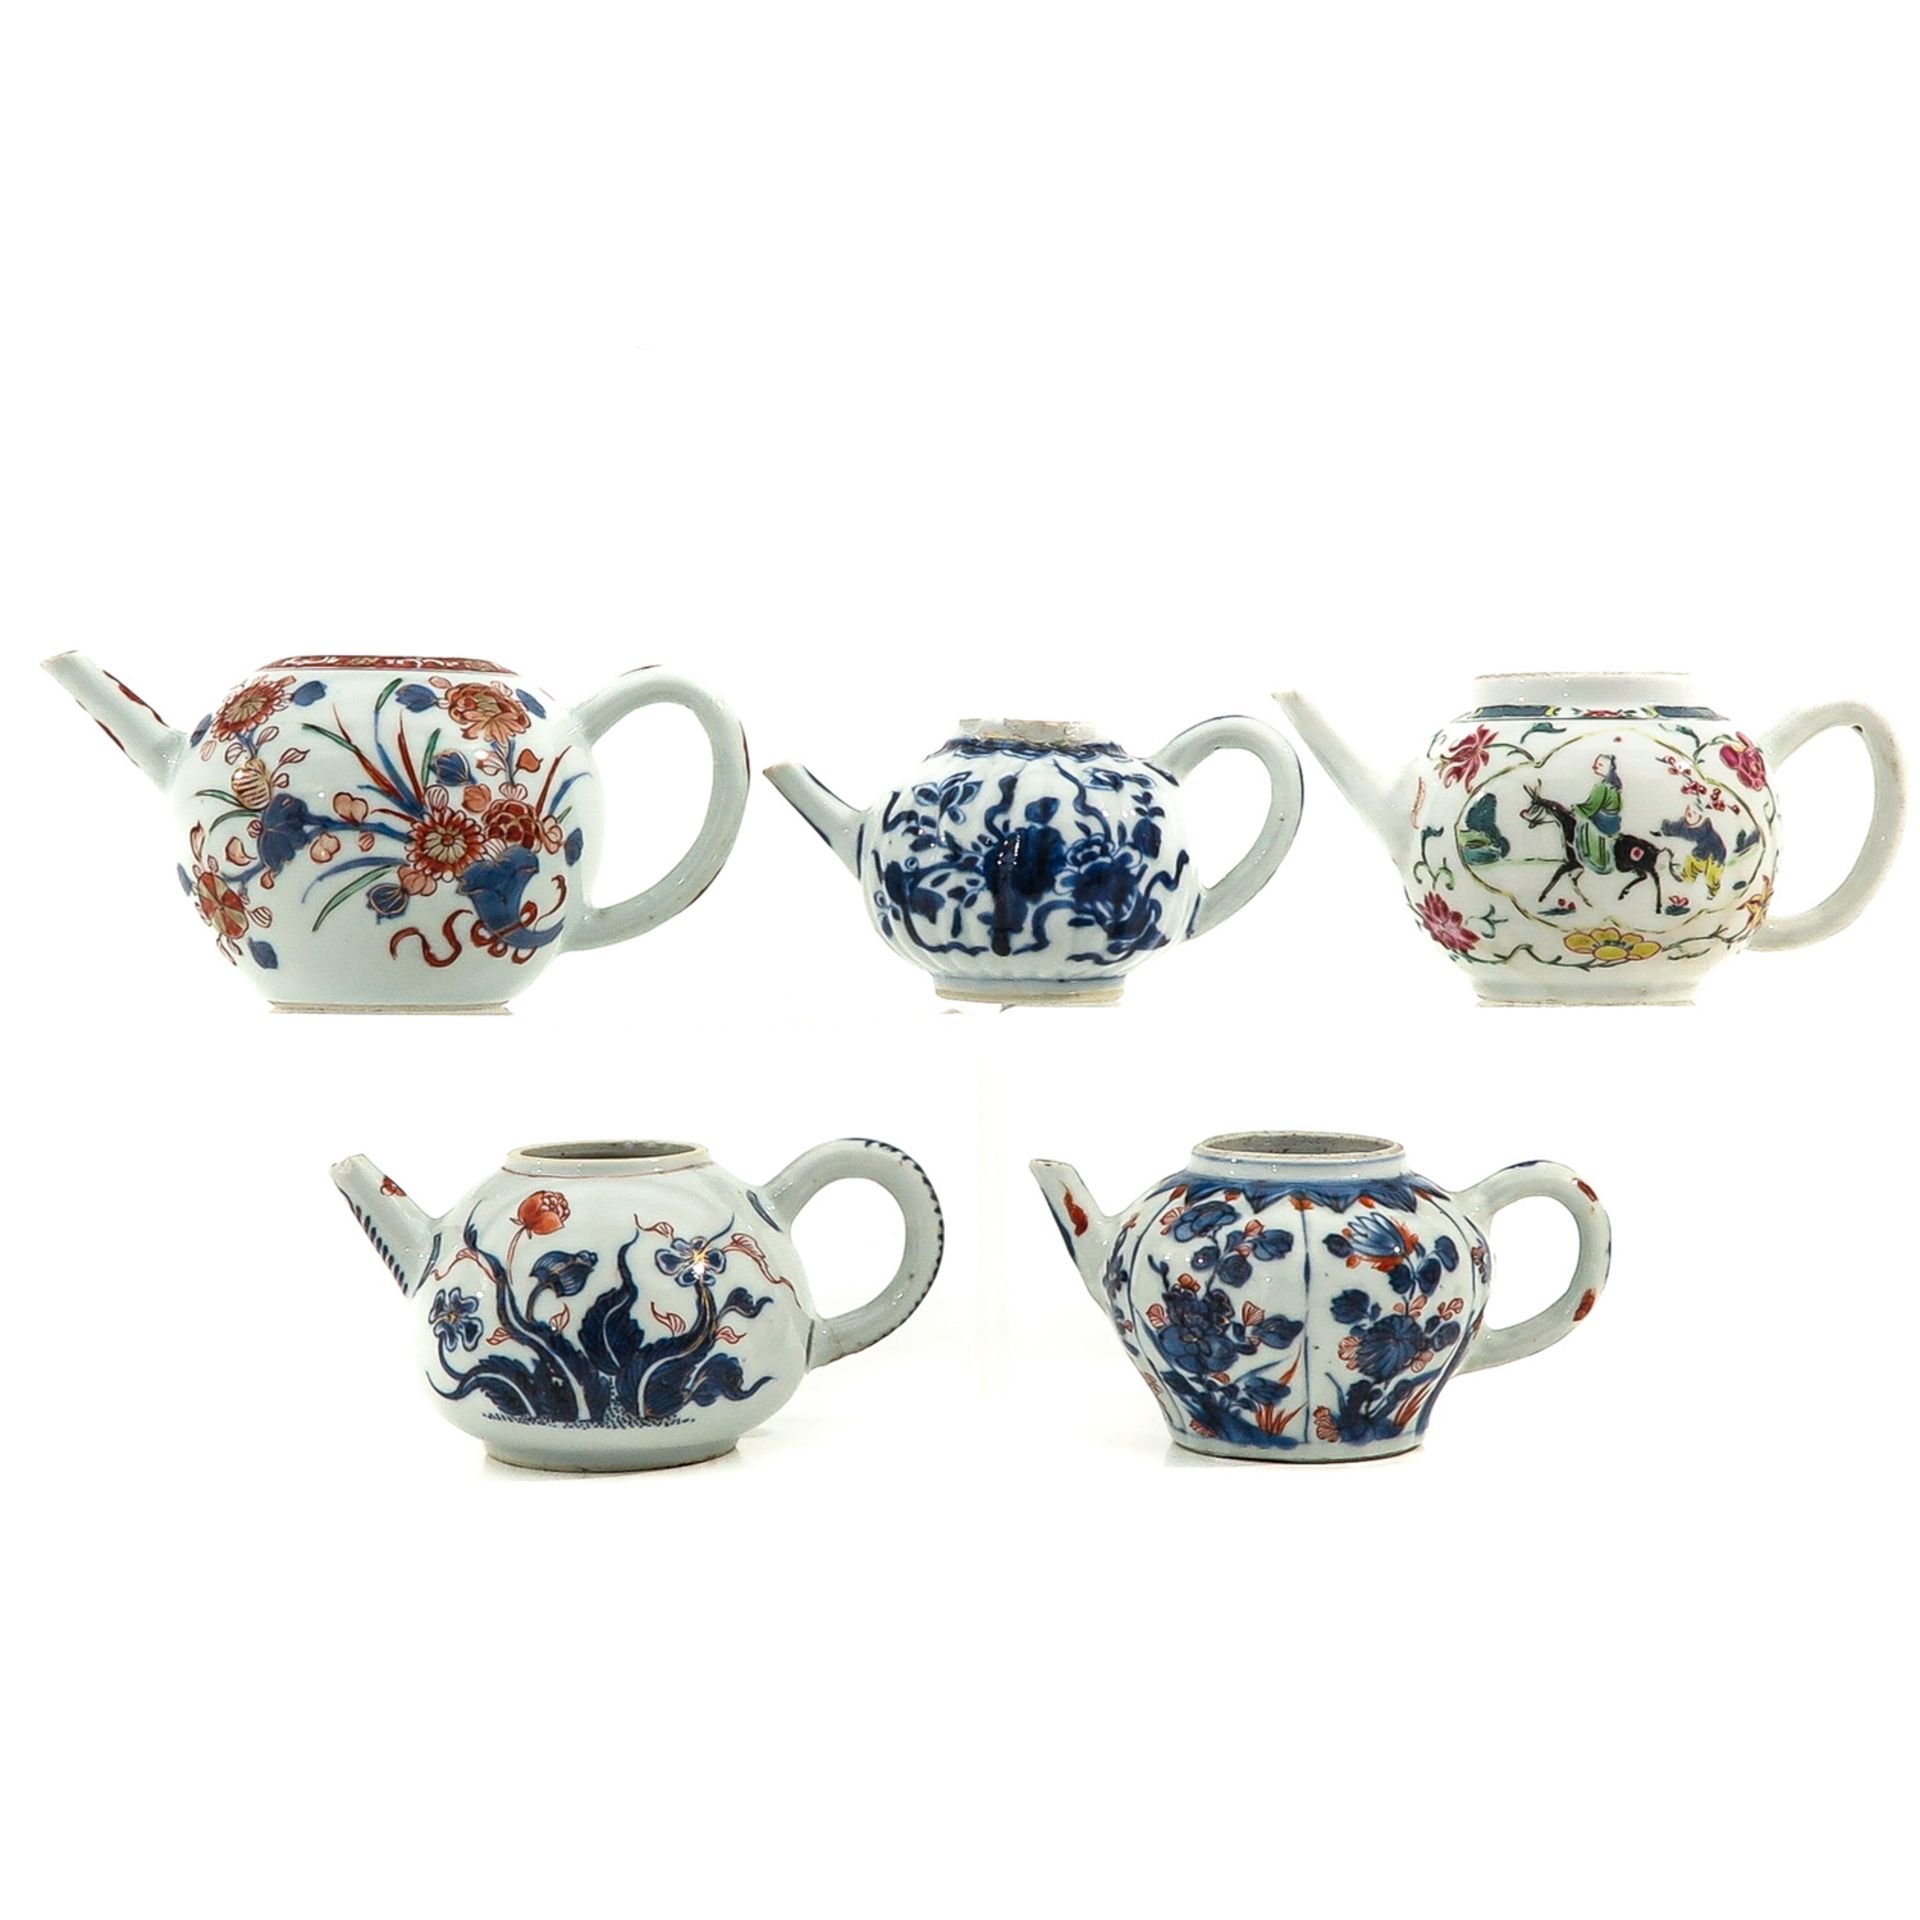 A Collection of 5 Teapots